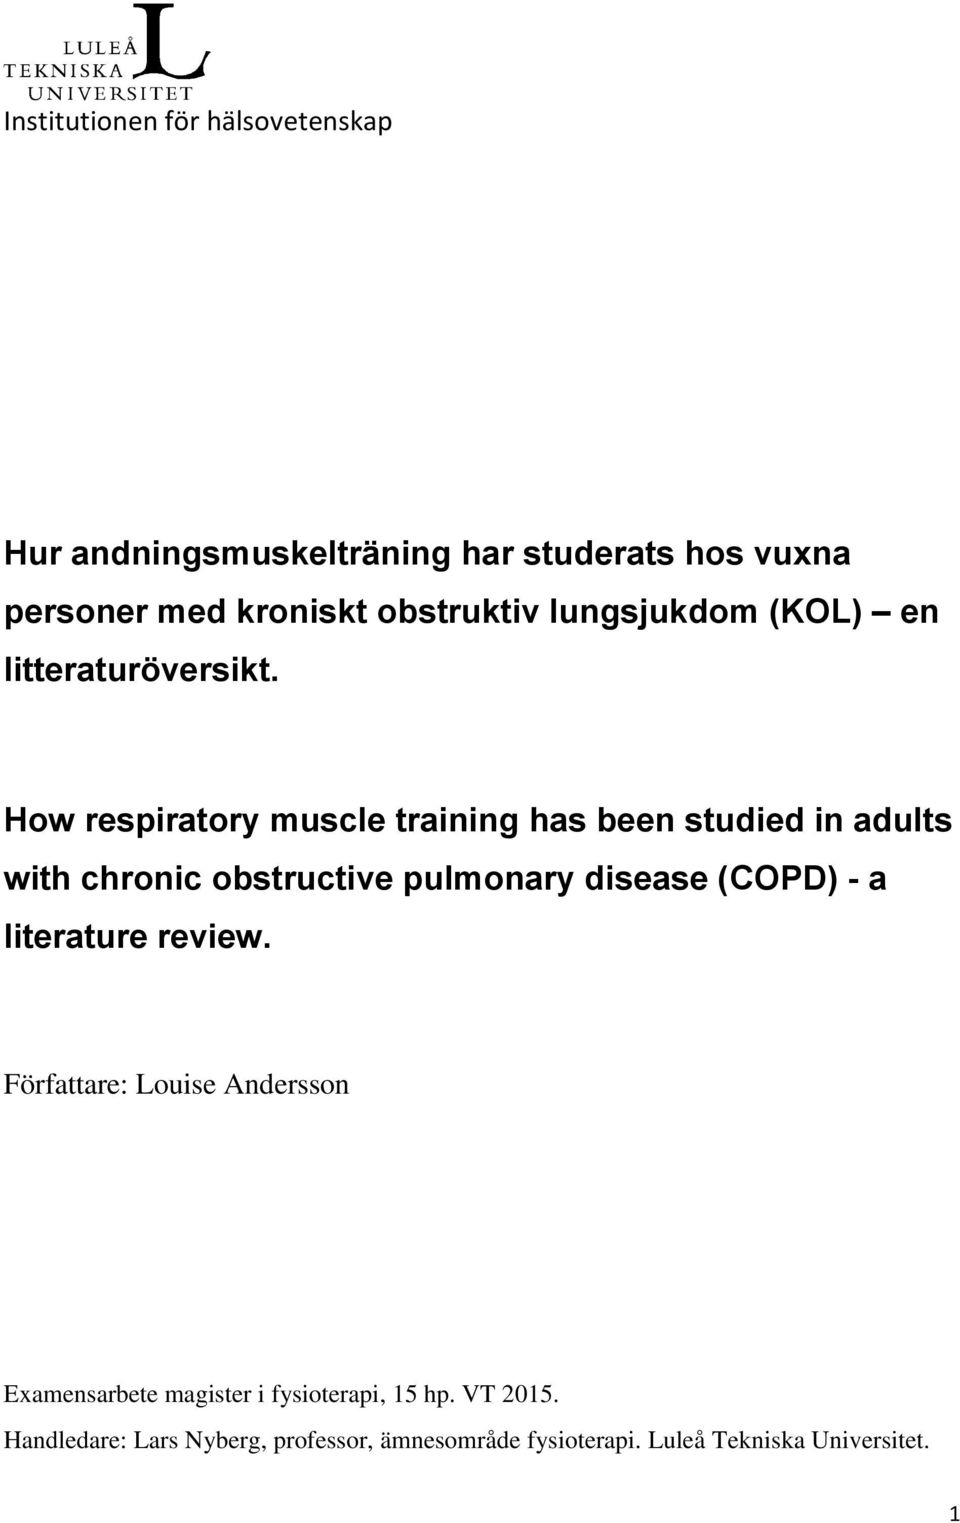 How respiratory muscle training has been studied in adults with chronic obstructive pulmonary disease (COPD) - a